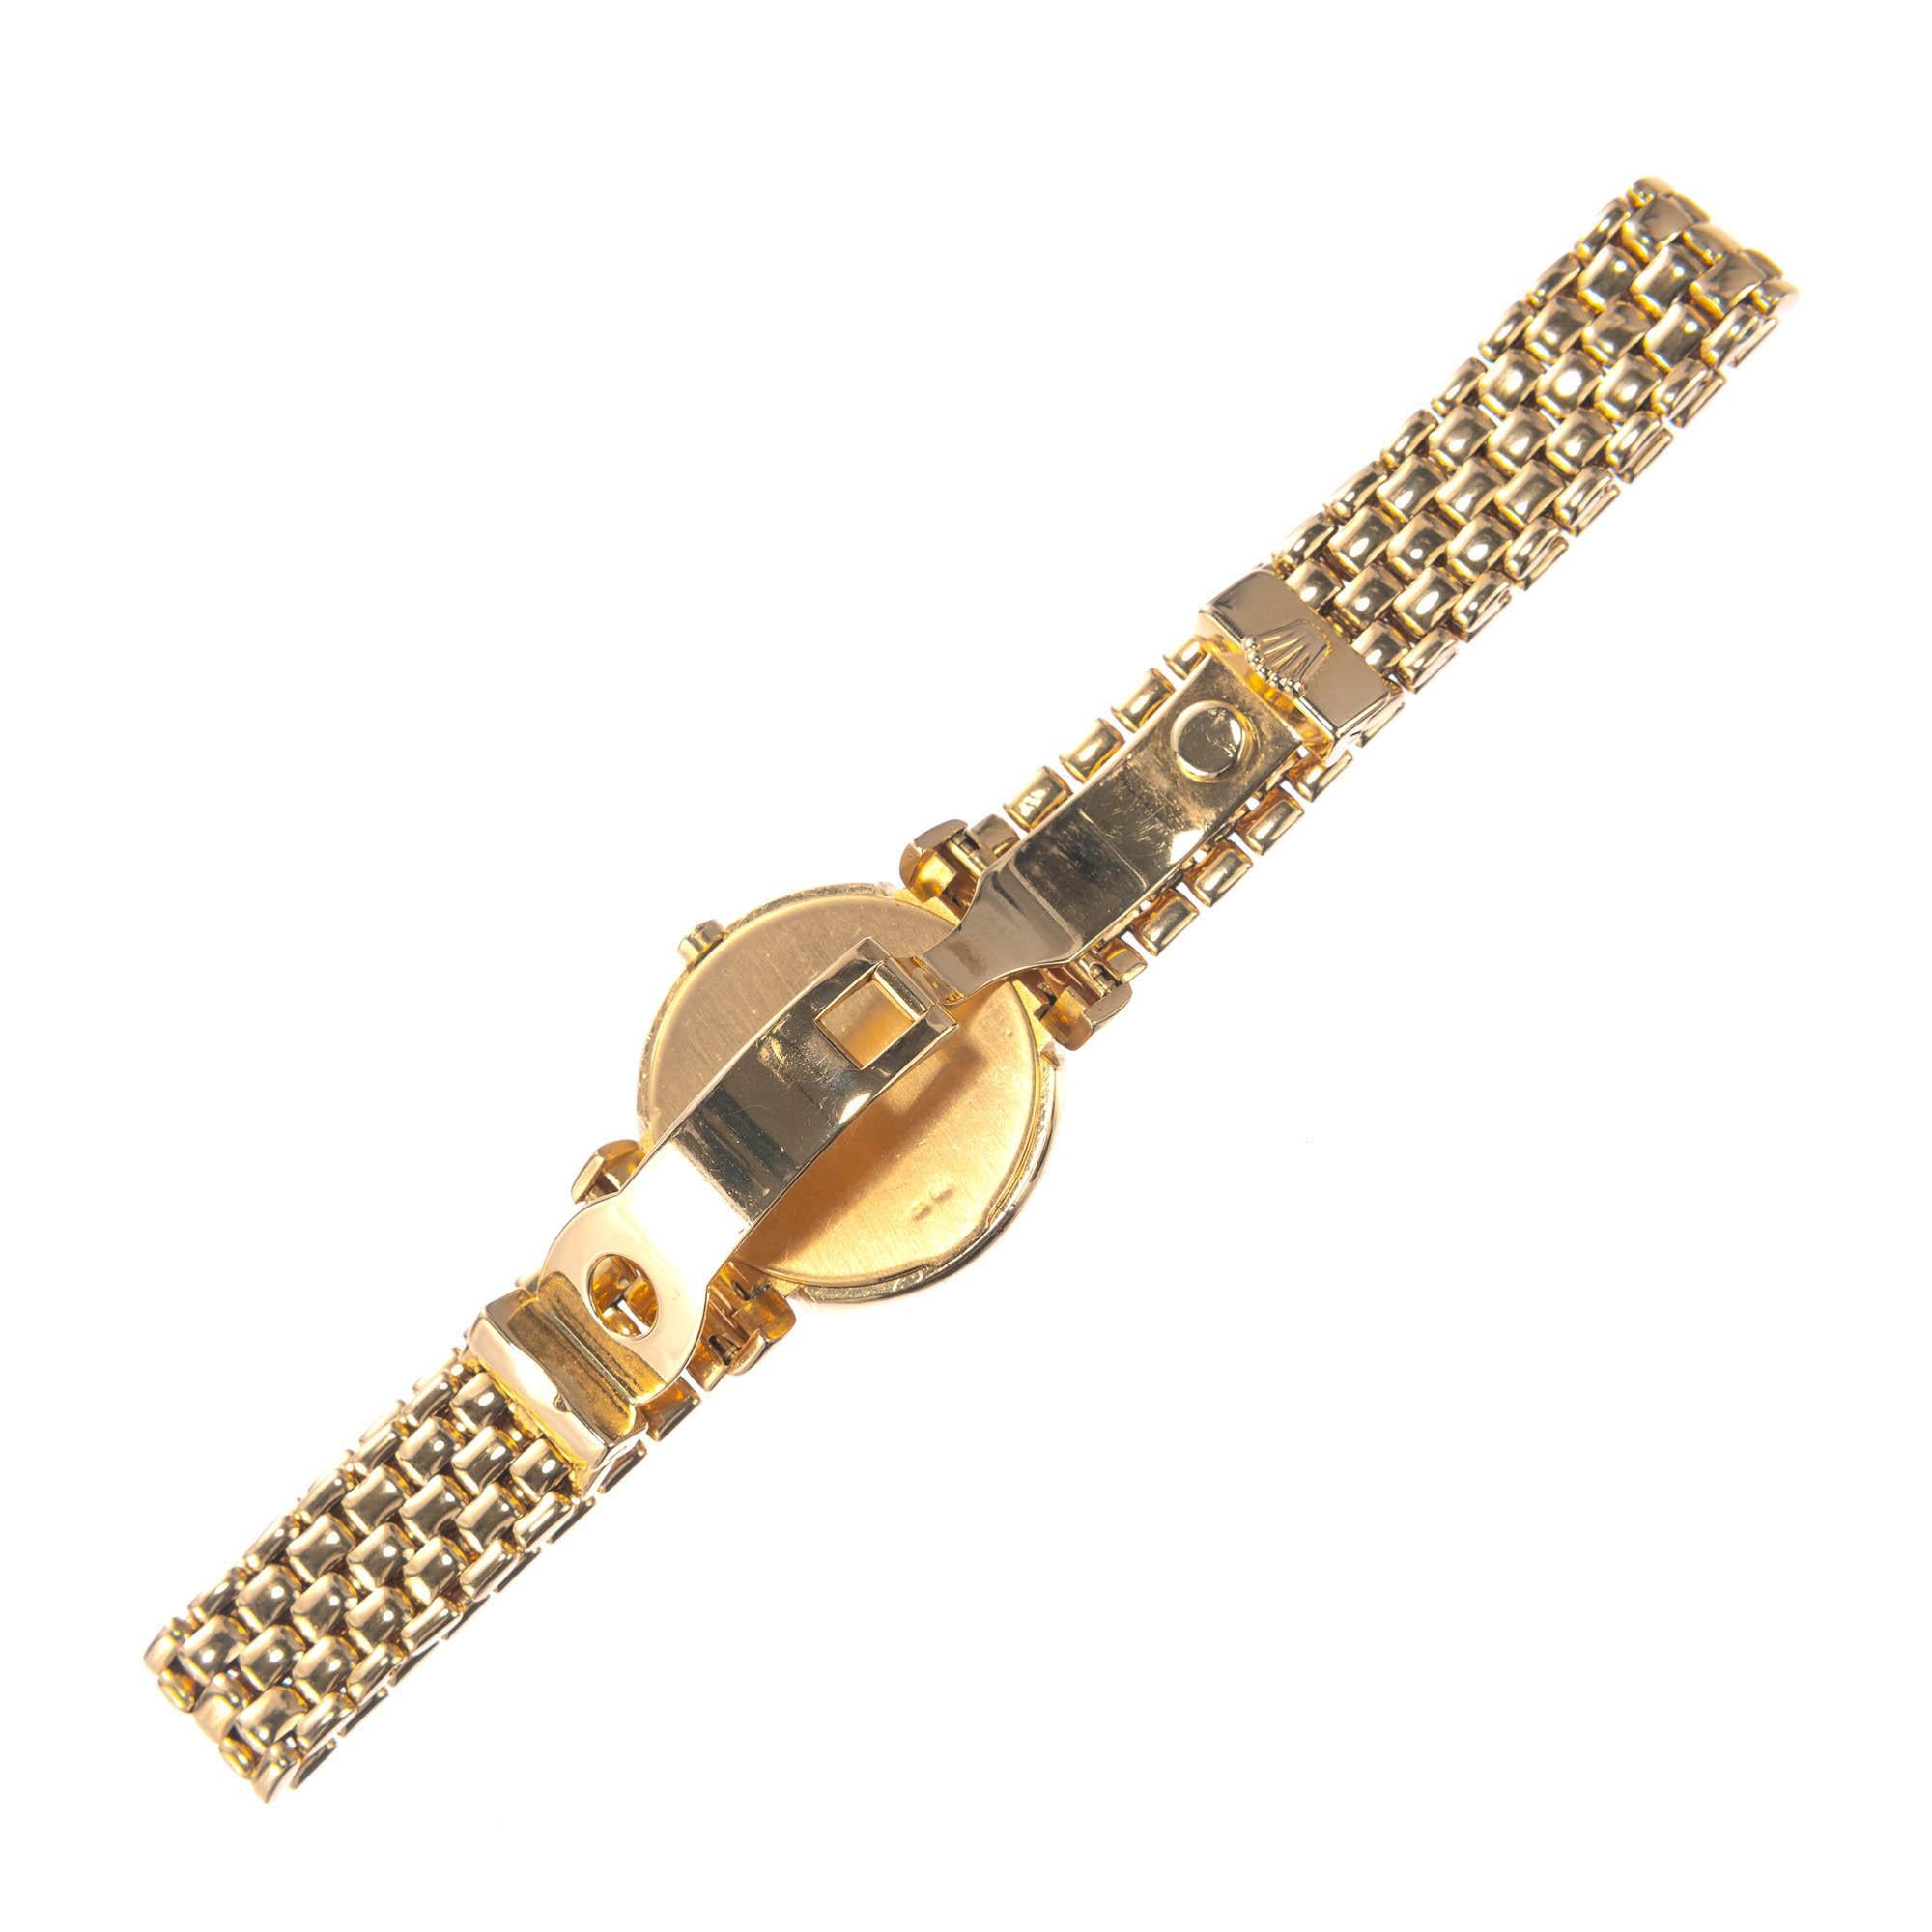 Rolex Cellini Cellissima quartz ladies wristwatch. Solid 18k yellow gold case and band full length at 7 5/8 Inches. 

Length: 27mm
Width: 26mm
Band Width at Case: 14mm
Case Thickness: 6mm
Band: 18k Yellow Gold 
Crystal: sapphire 
Dial:  champagne